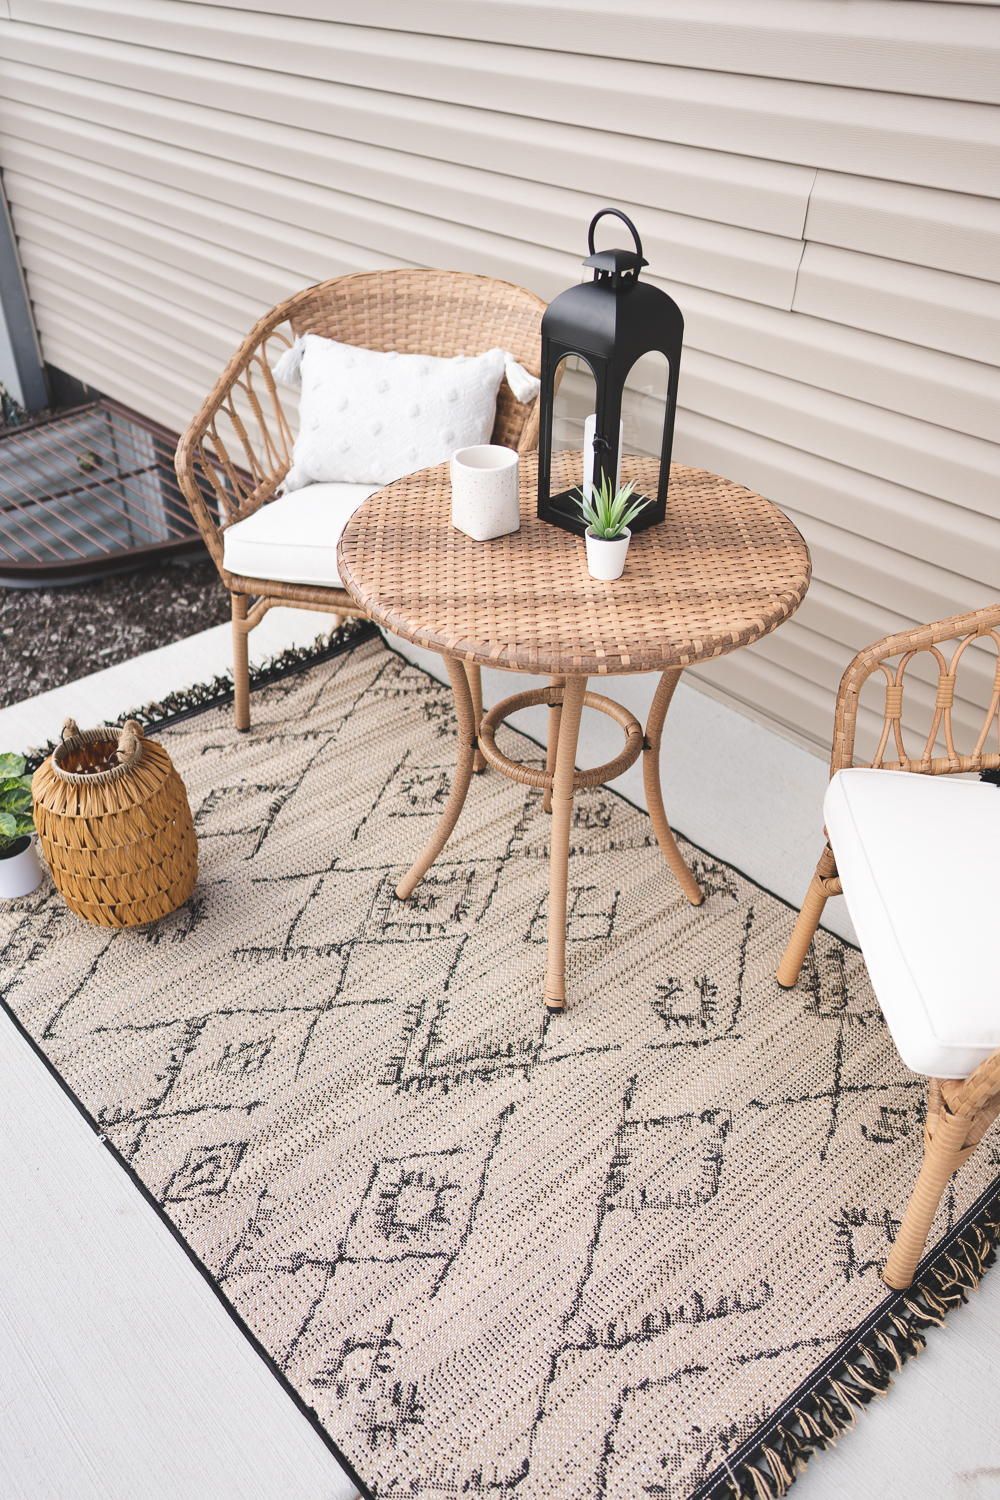 Get best patio bistro set for your home